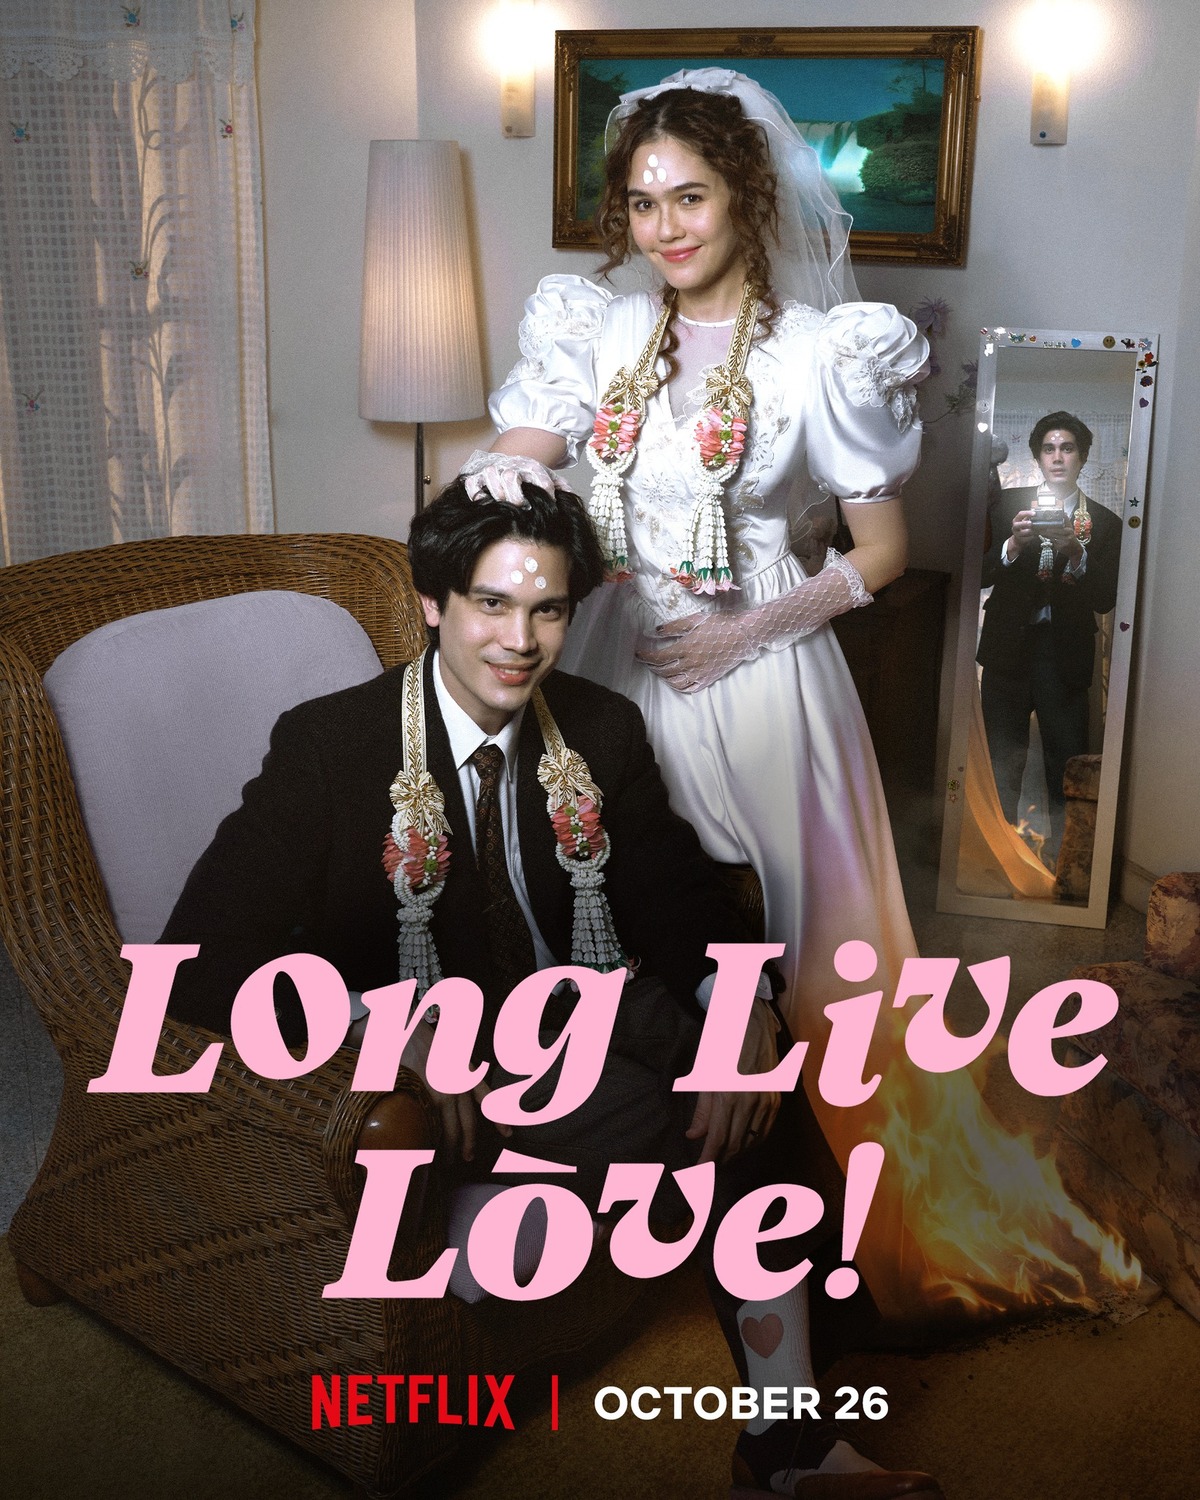 Extra Large Movie Poster Image for Long Live Love! (#3 of 3)